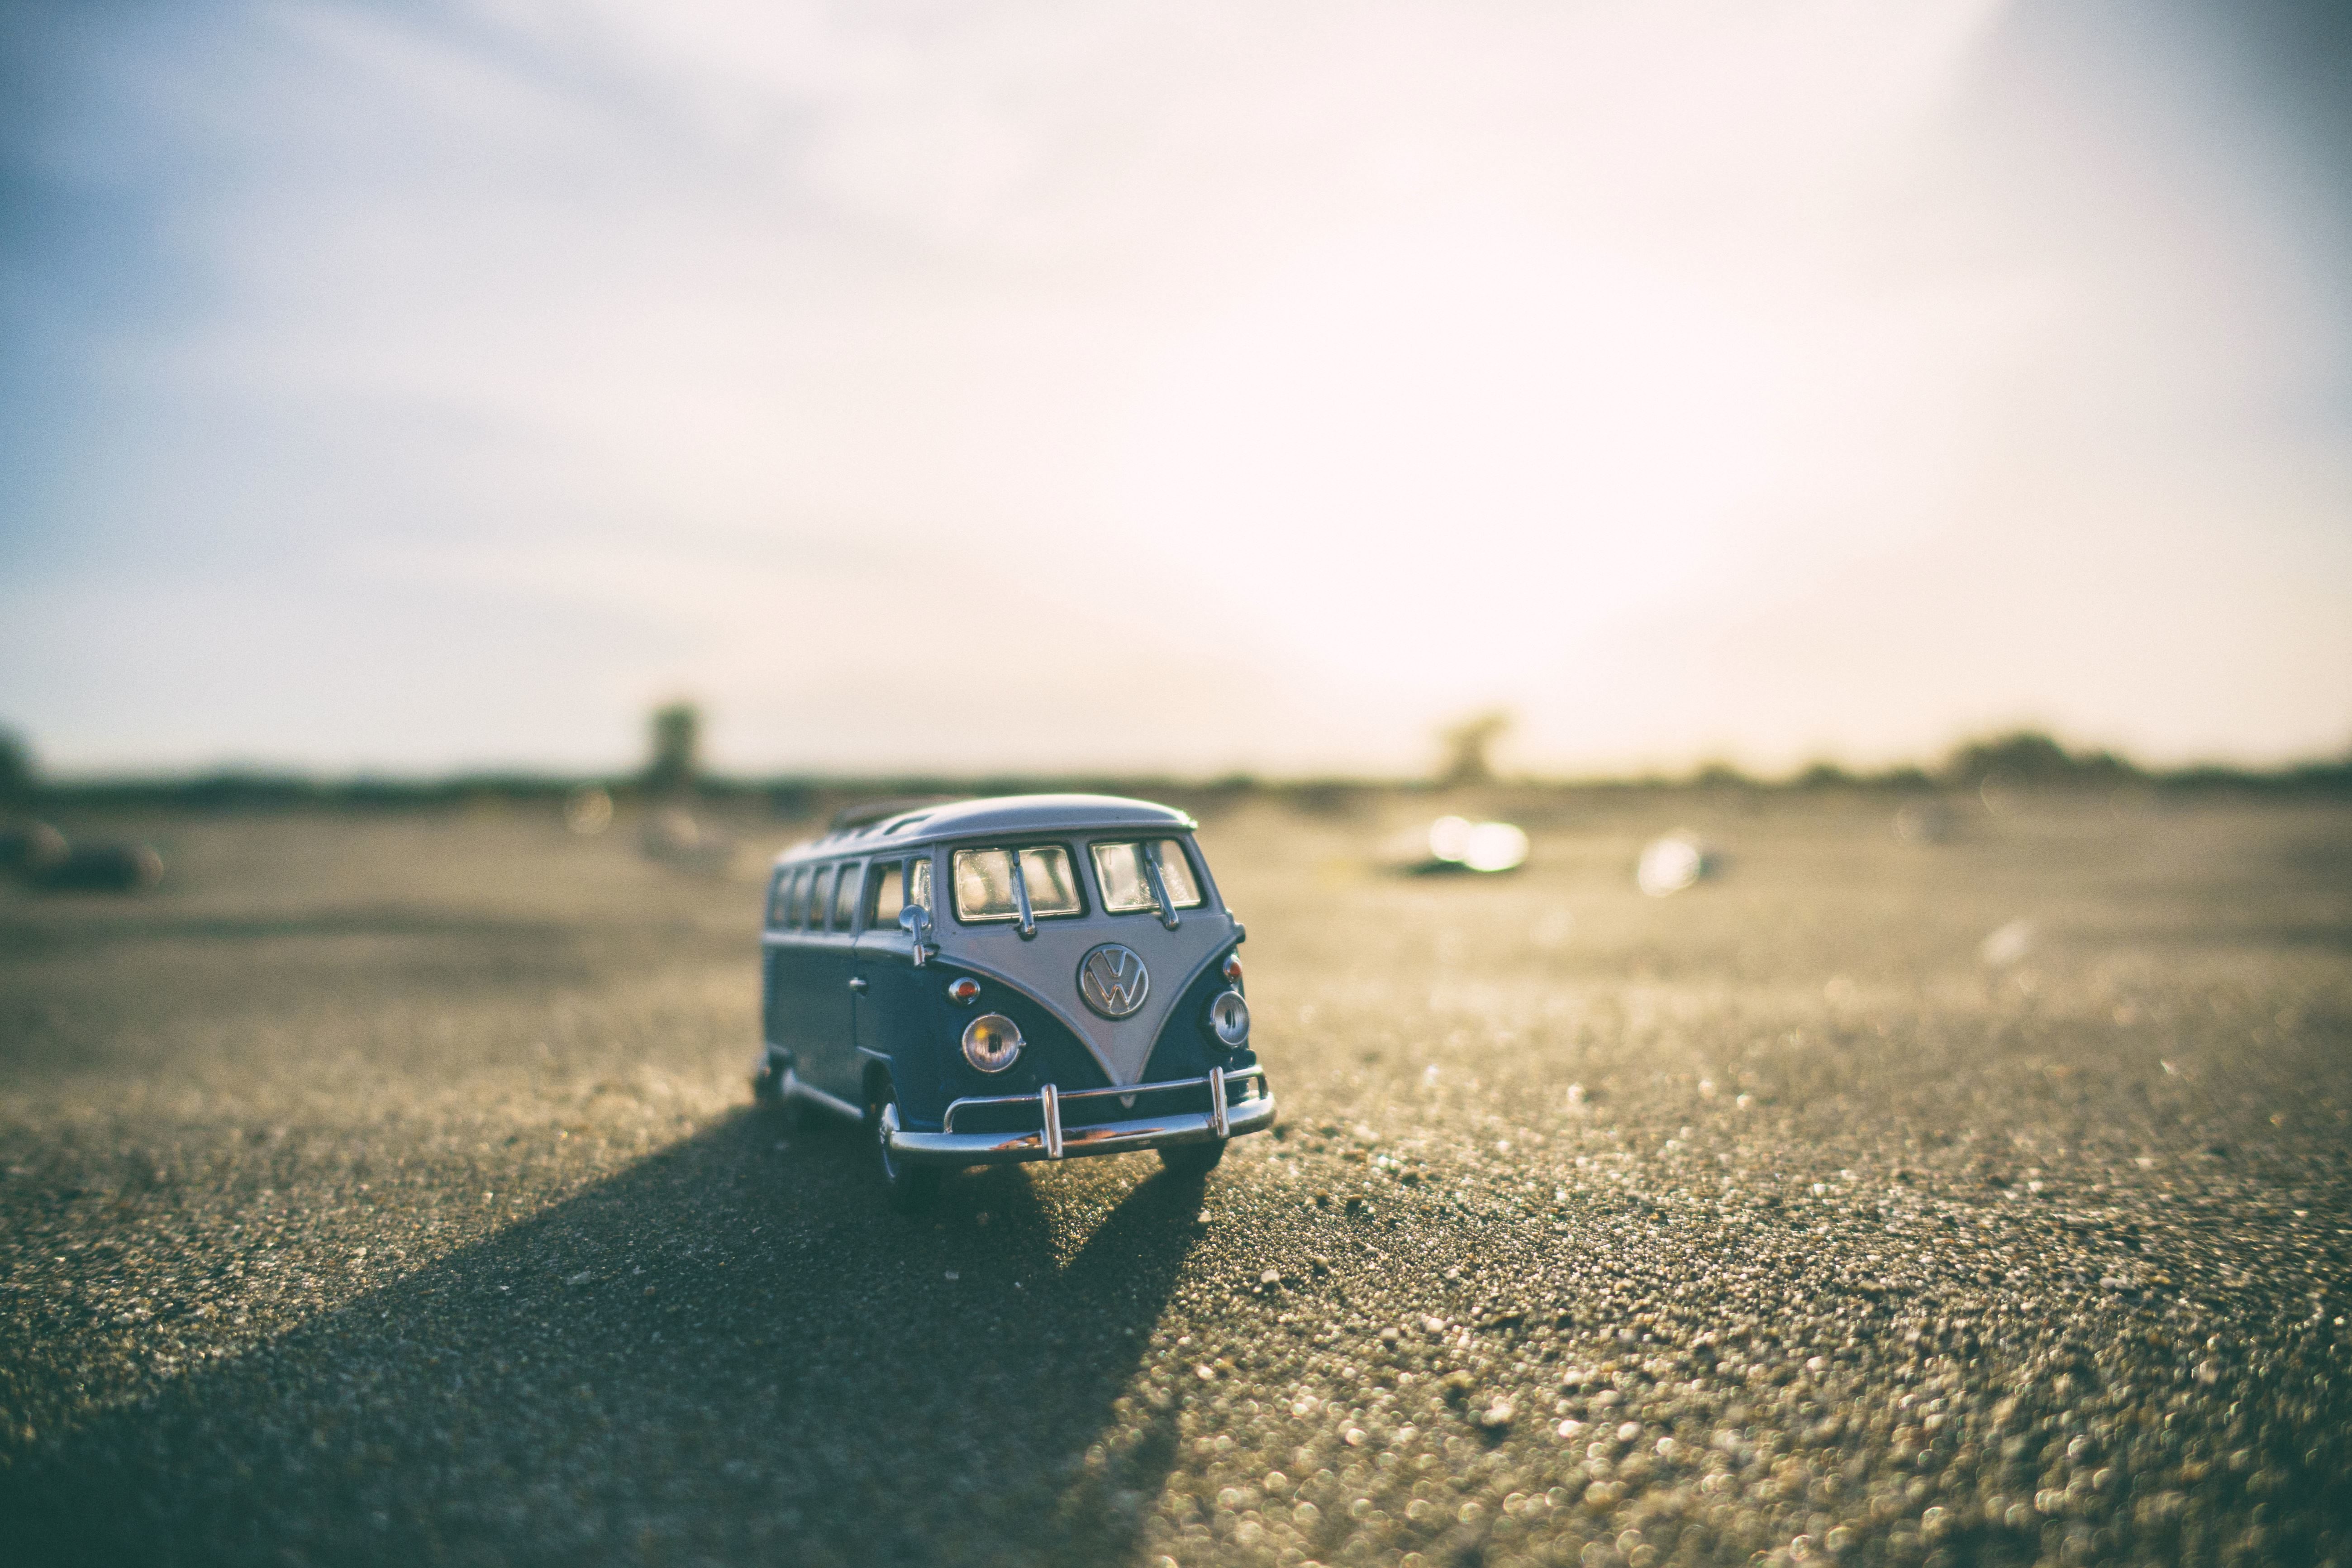 Free picture: miniature, car, toy, road